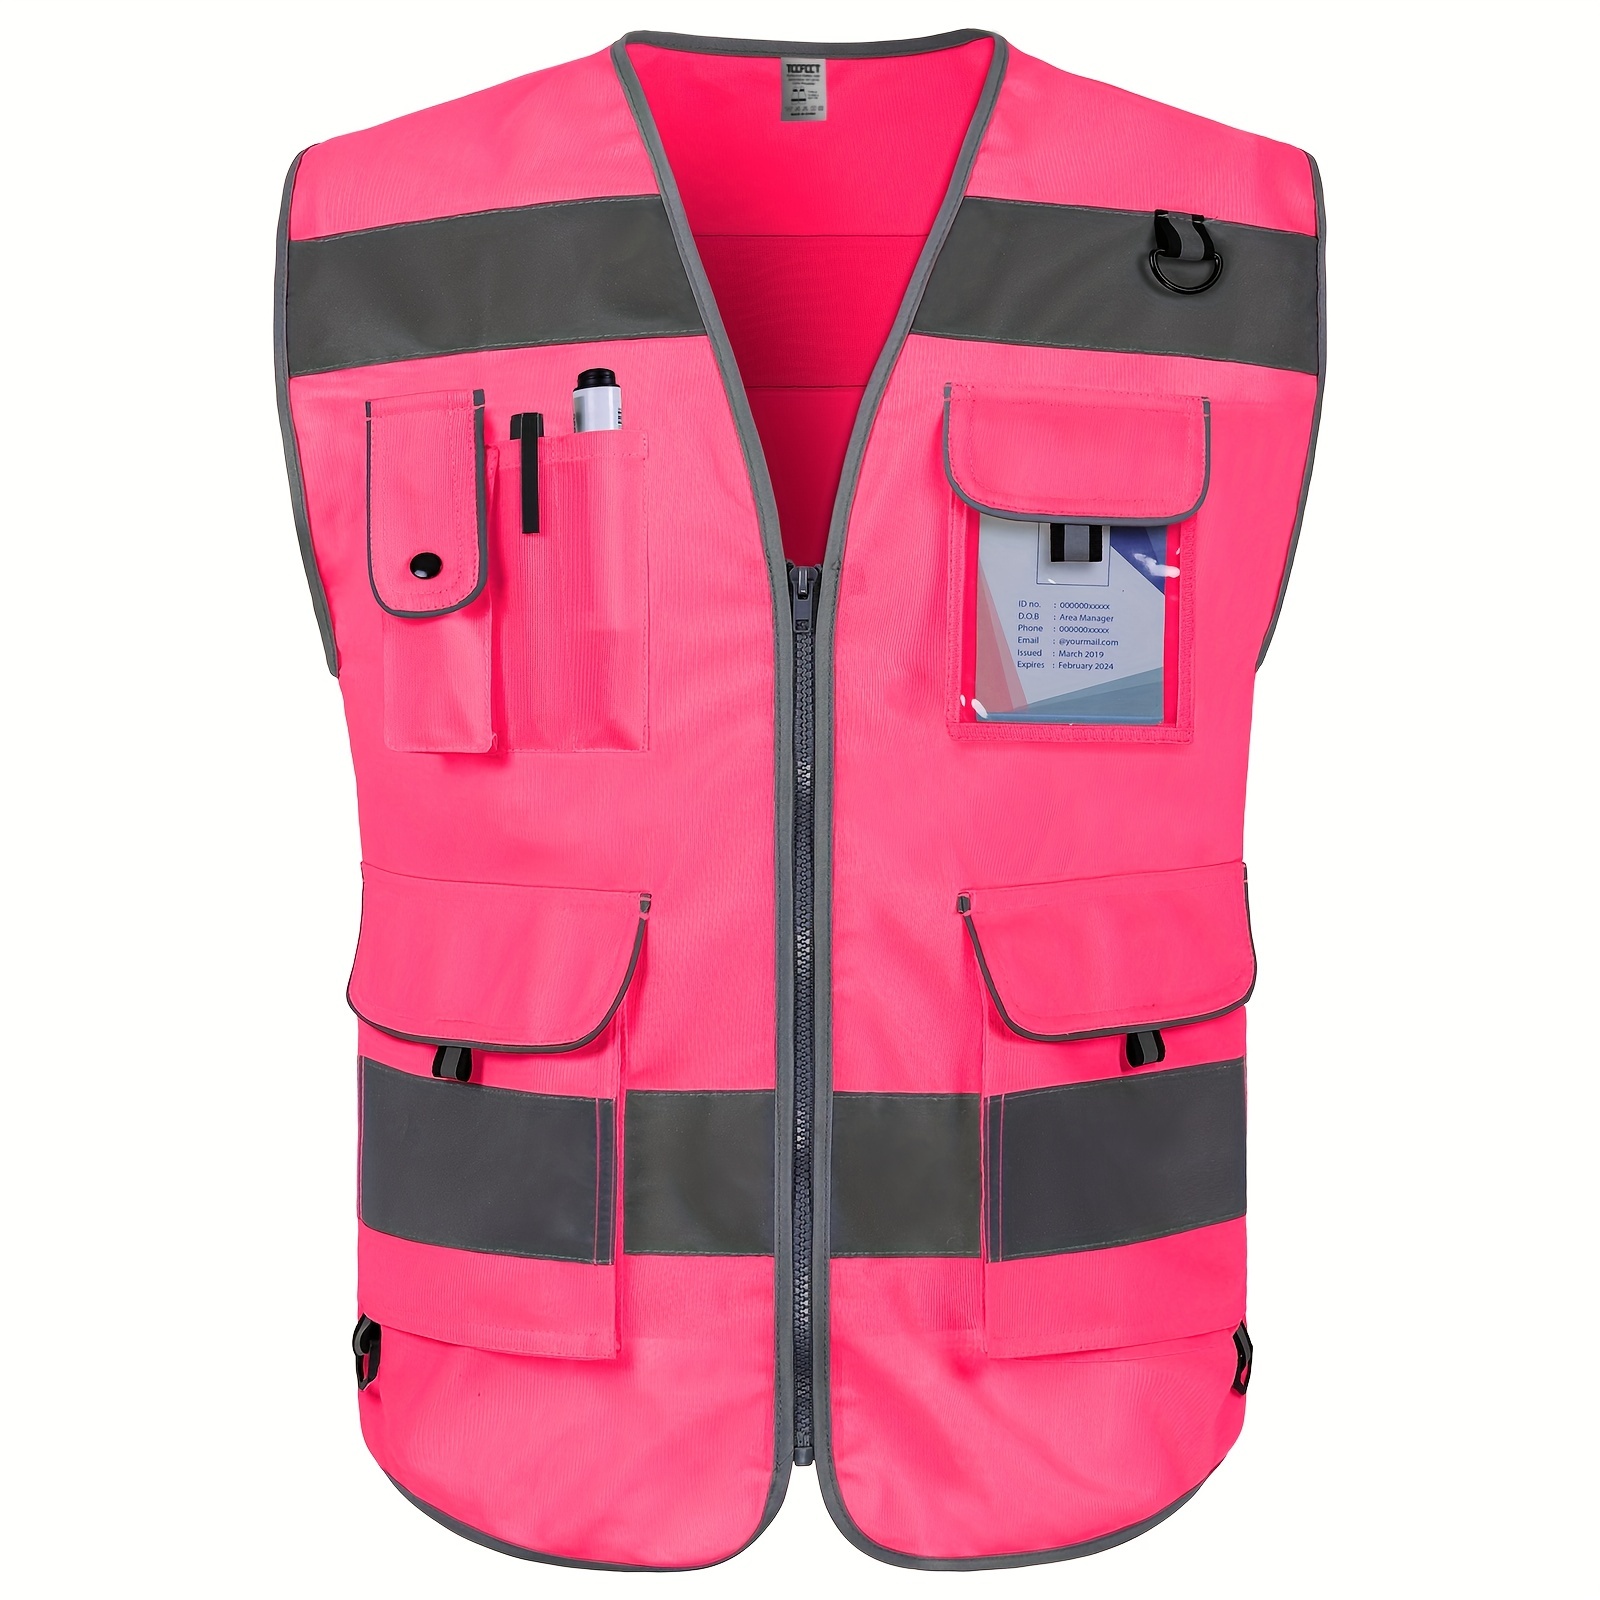 Tccfcct Safety Vest For Men Women Pockets High Visibility Reflective Vest  For Safety, Premium Fabric With Reinforced Sewing, Hi Vis Construction Work  Vest For Surveyors, Drivers And Warehouse, Meets Ansi/isea Standards,